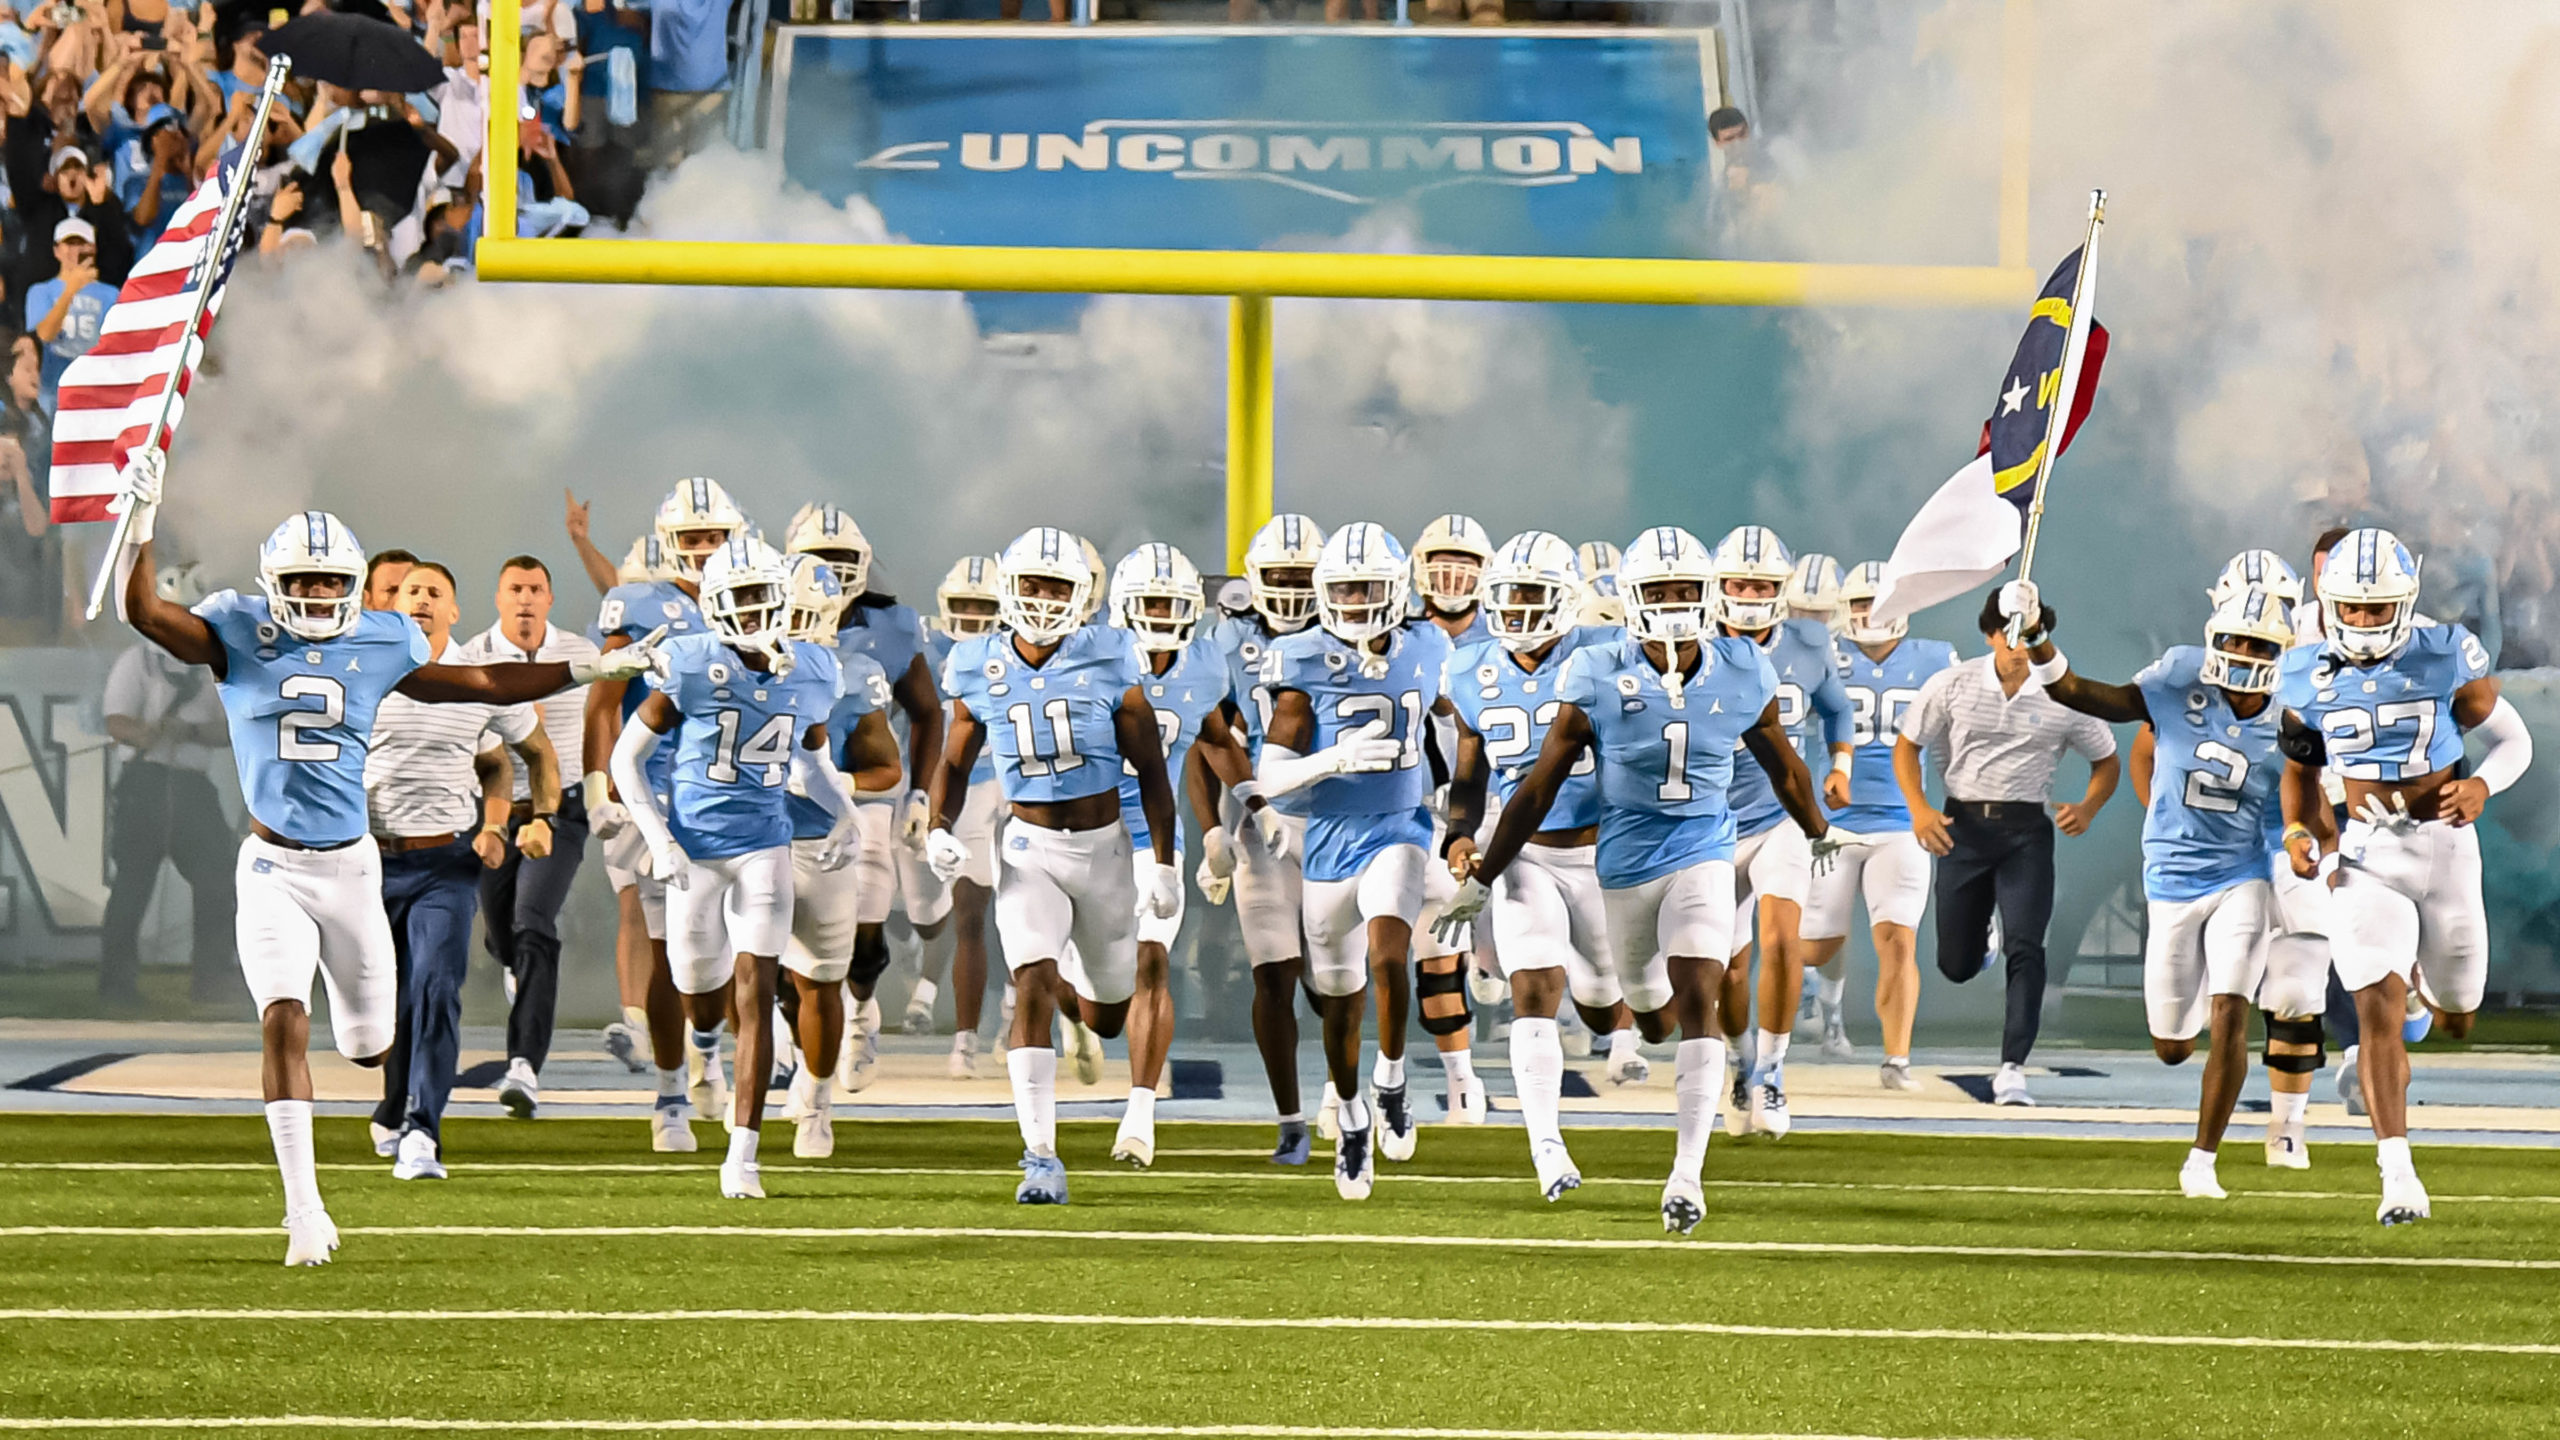 UNC vs Miami Football Game Watch Party